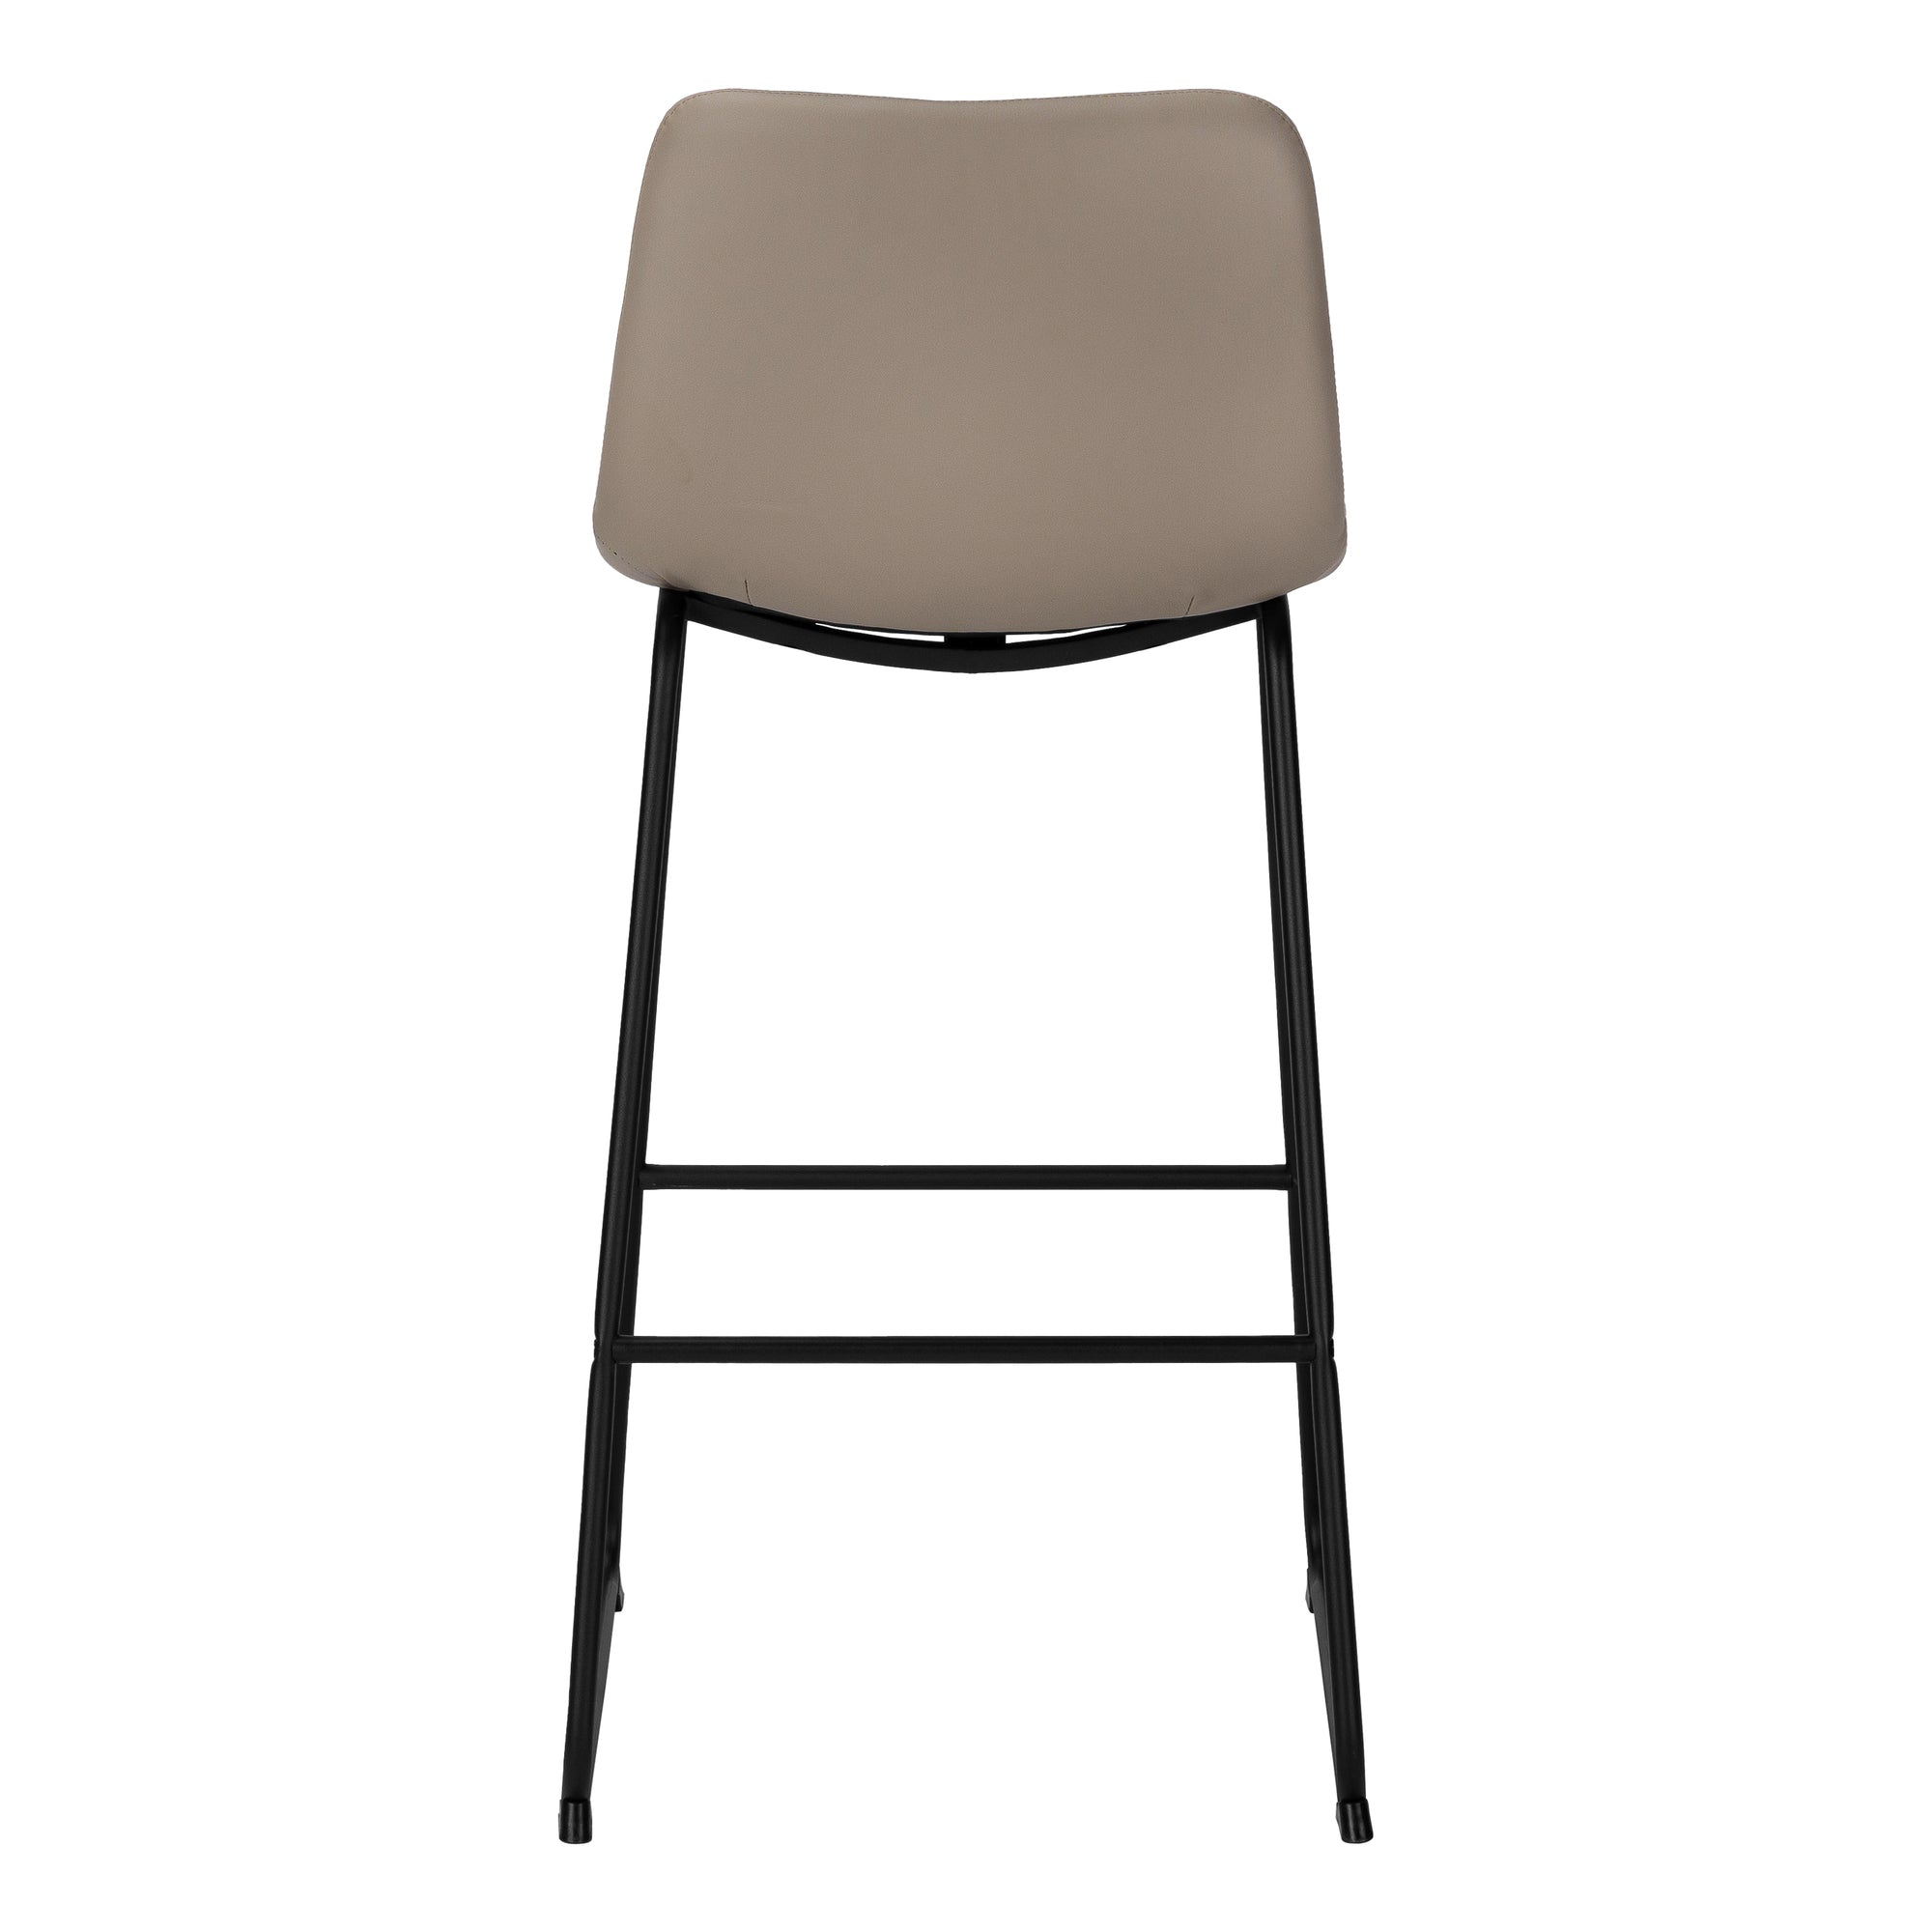 MN-107751    Office Chair - Standing Desk, Metal Frame, Curved Backrest,  Taupe Leather-Look,  Black